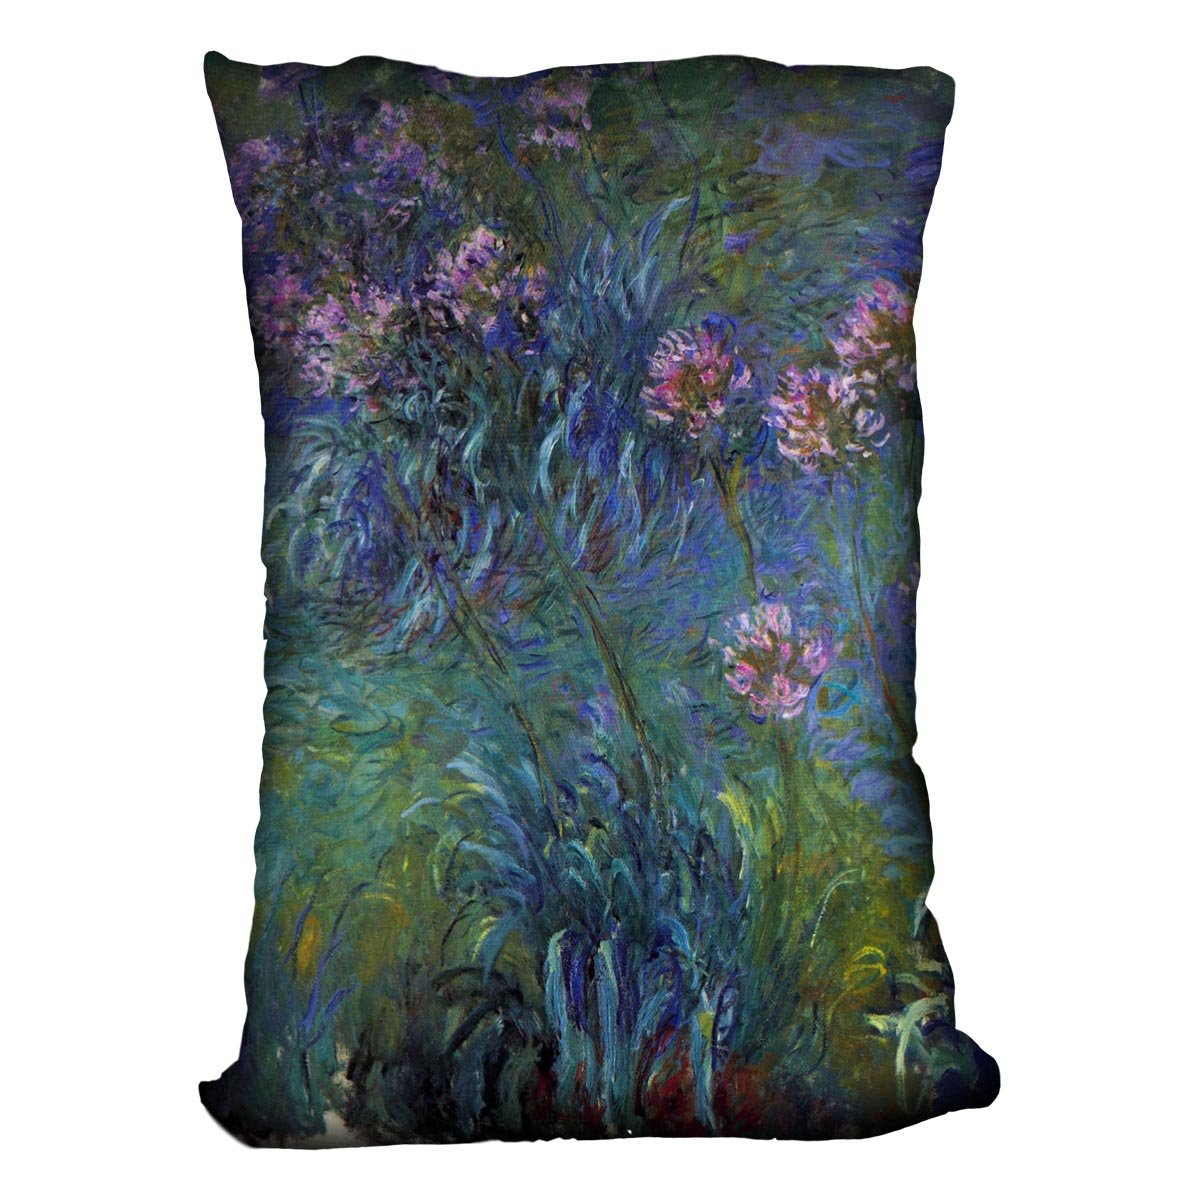 Jewelry lilies by Monet Throw Pillow